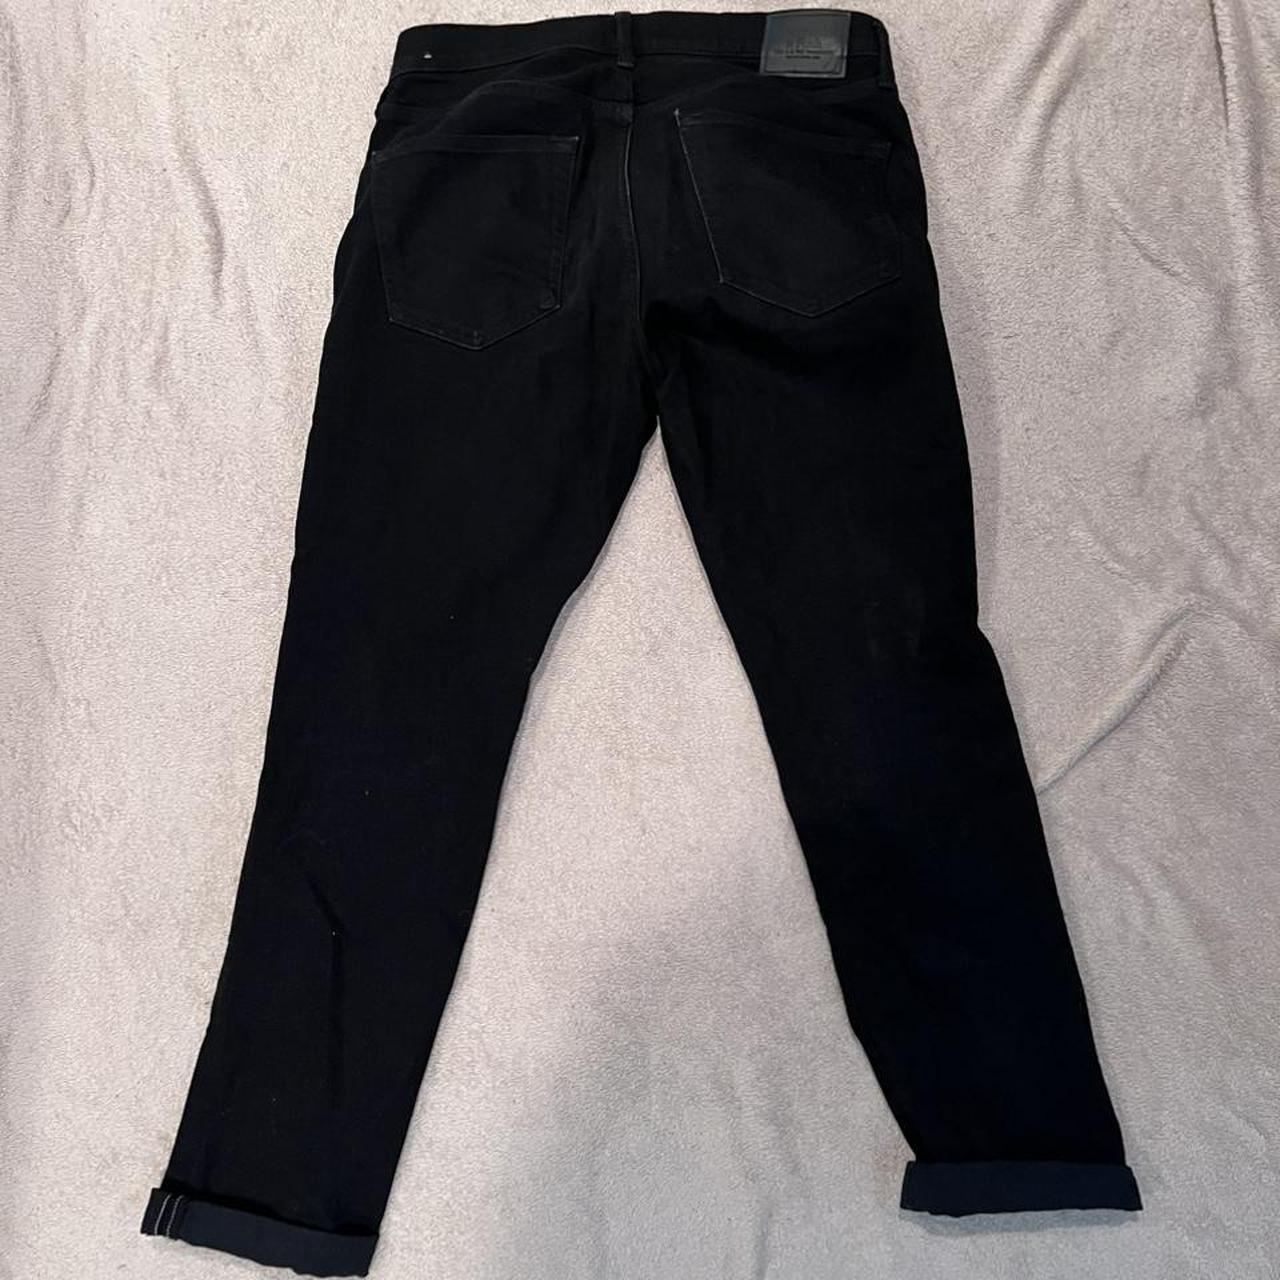 Abercrombie and fitch 32w 30l men’s stretchy skinny... - Depop